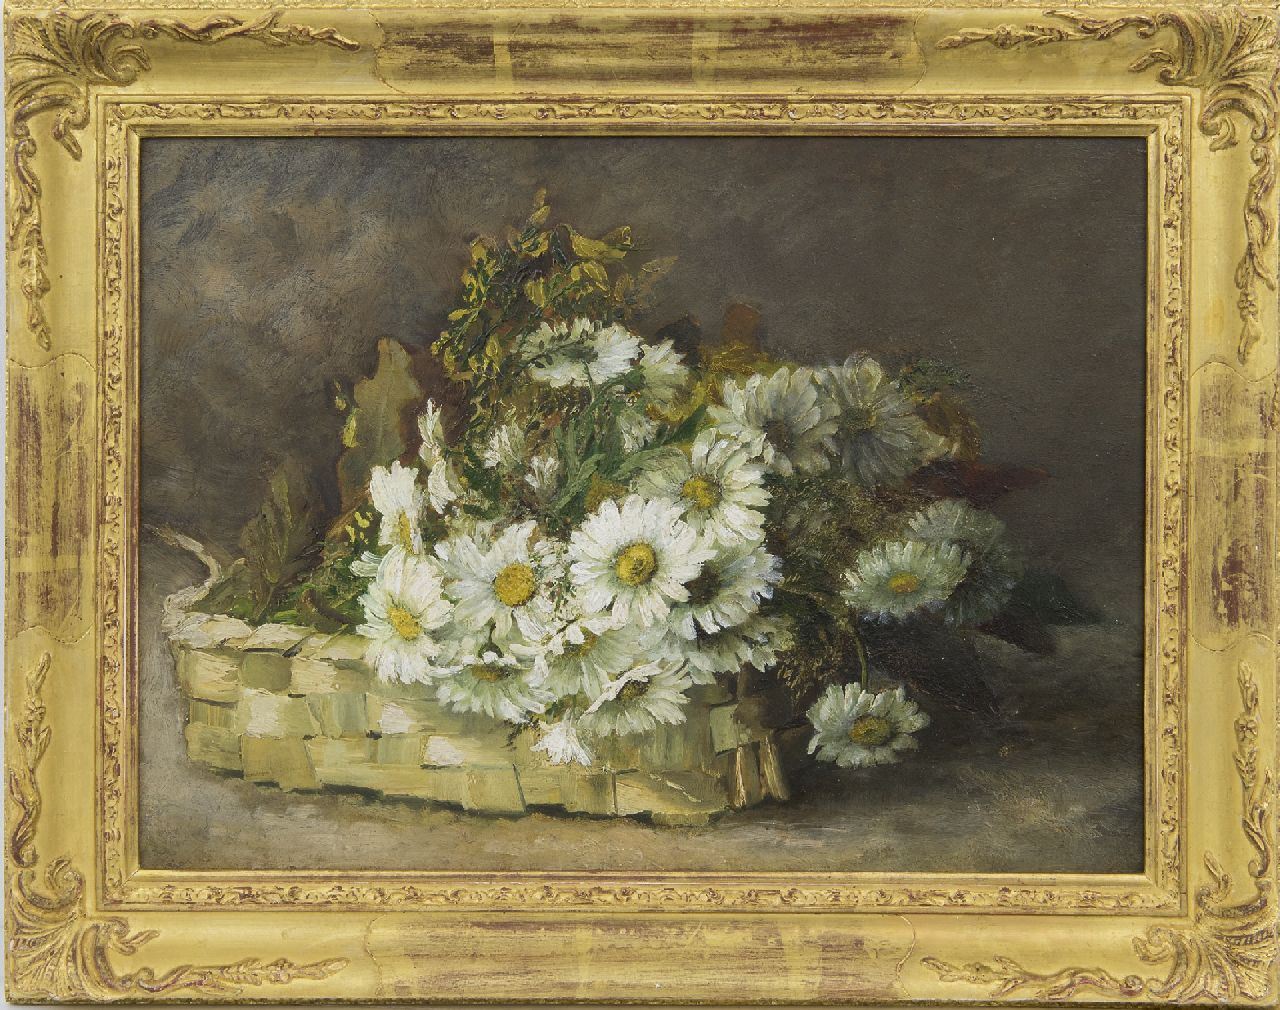 Onbekend   | Onbekend | Paintings offered for sale | Daisies in a basket, oil on panel 28.0 x 38.1 cm